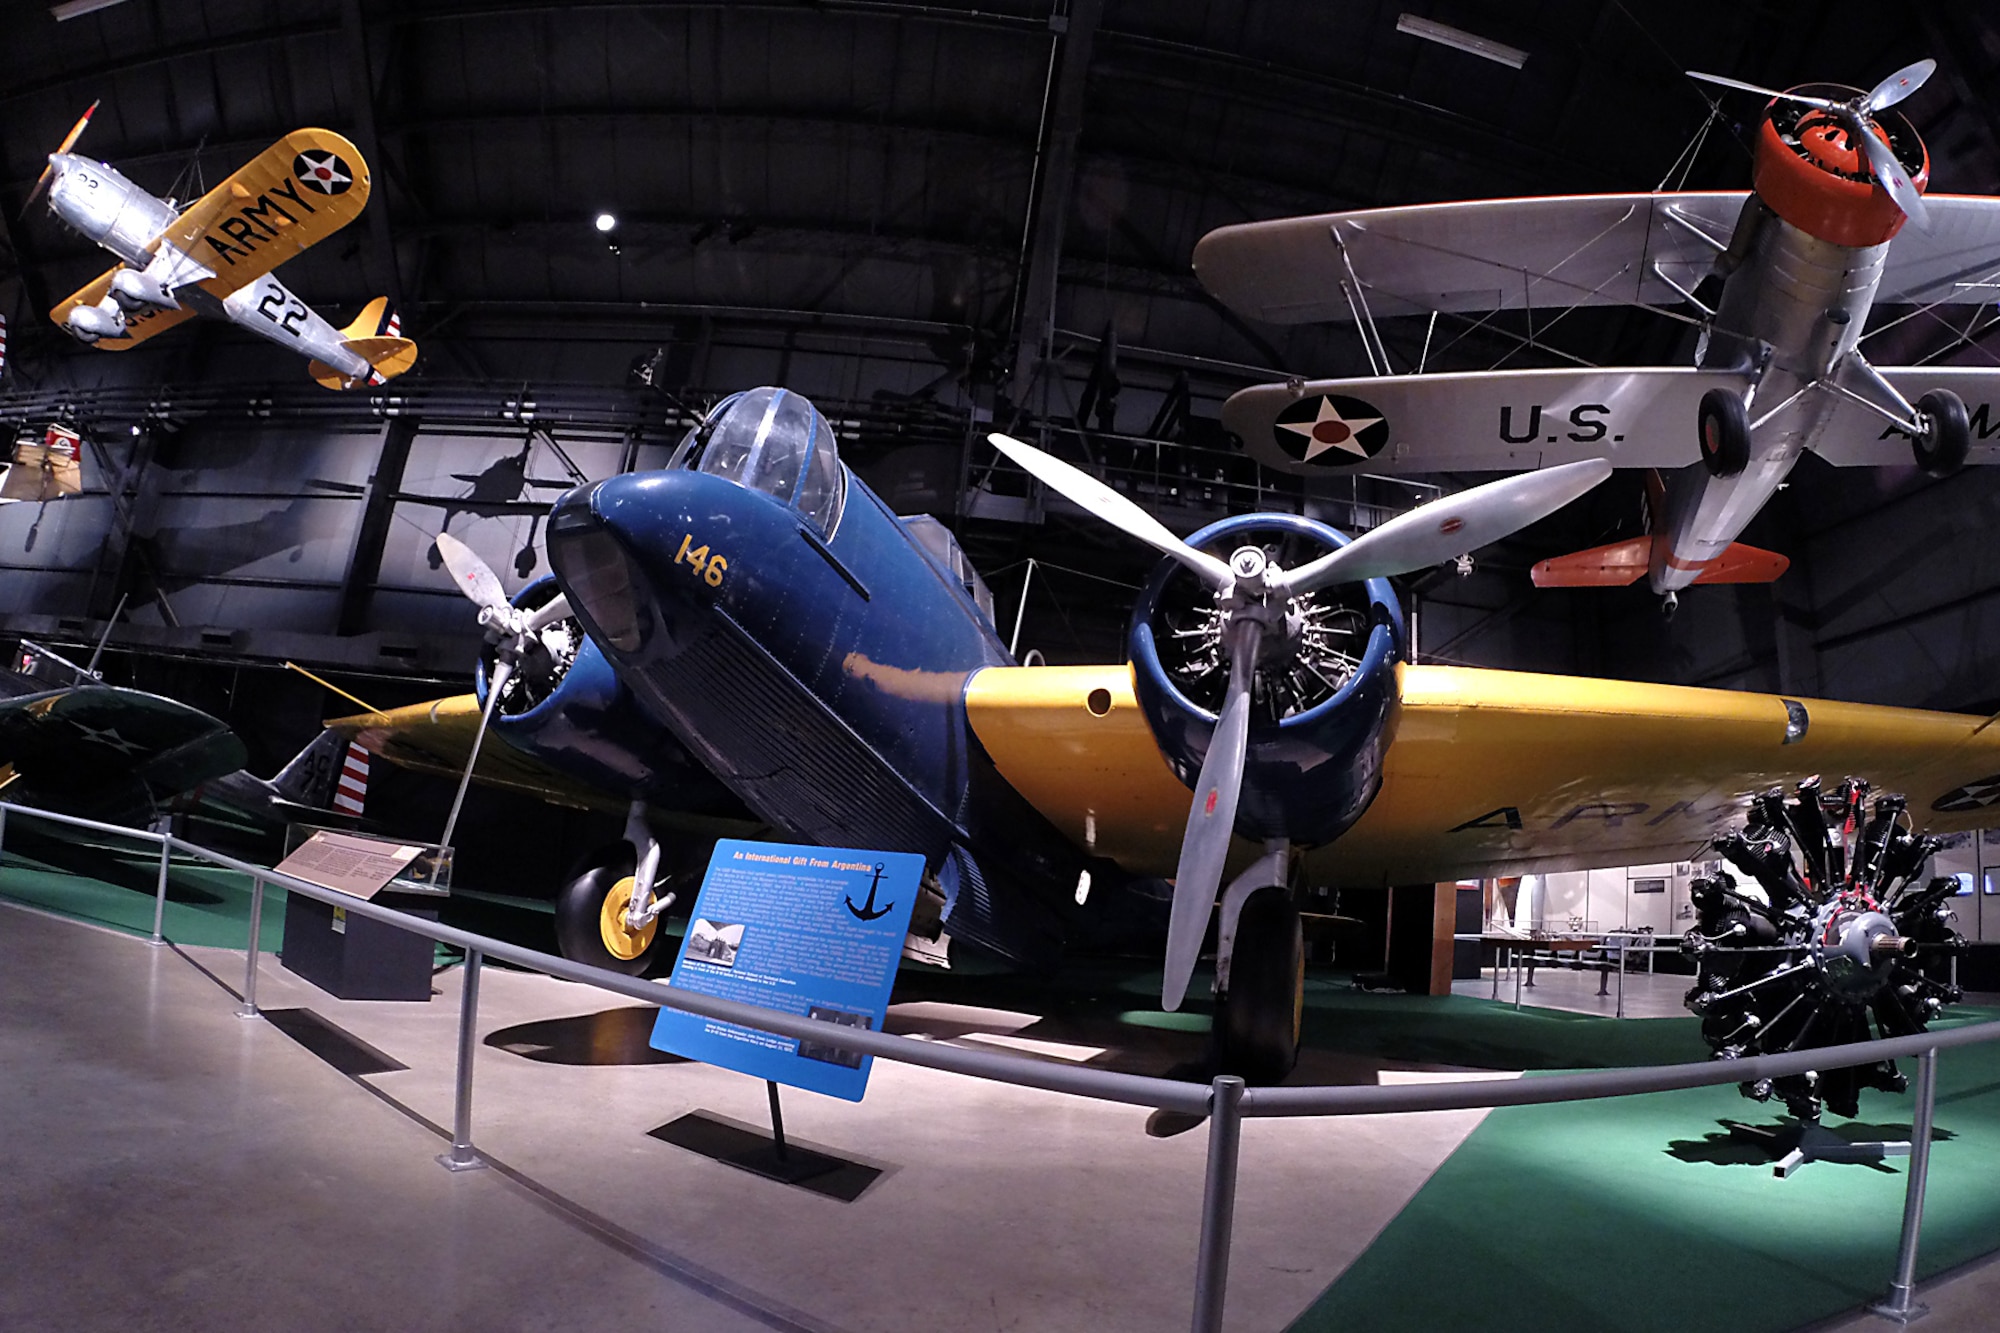 Martin B-10 in the Early Years Gallery at the National Museum of the United States Air Force. (U.S. Air Force photo)
